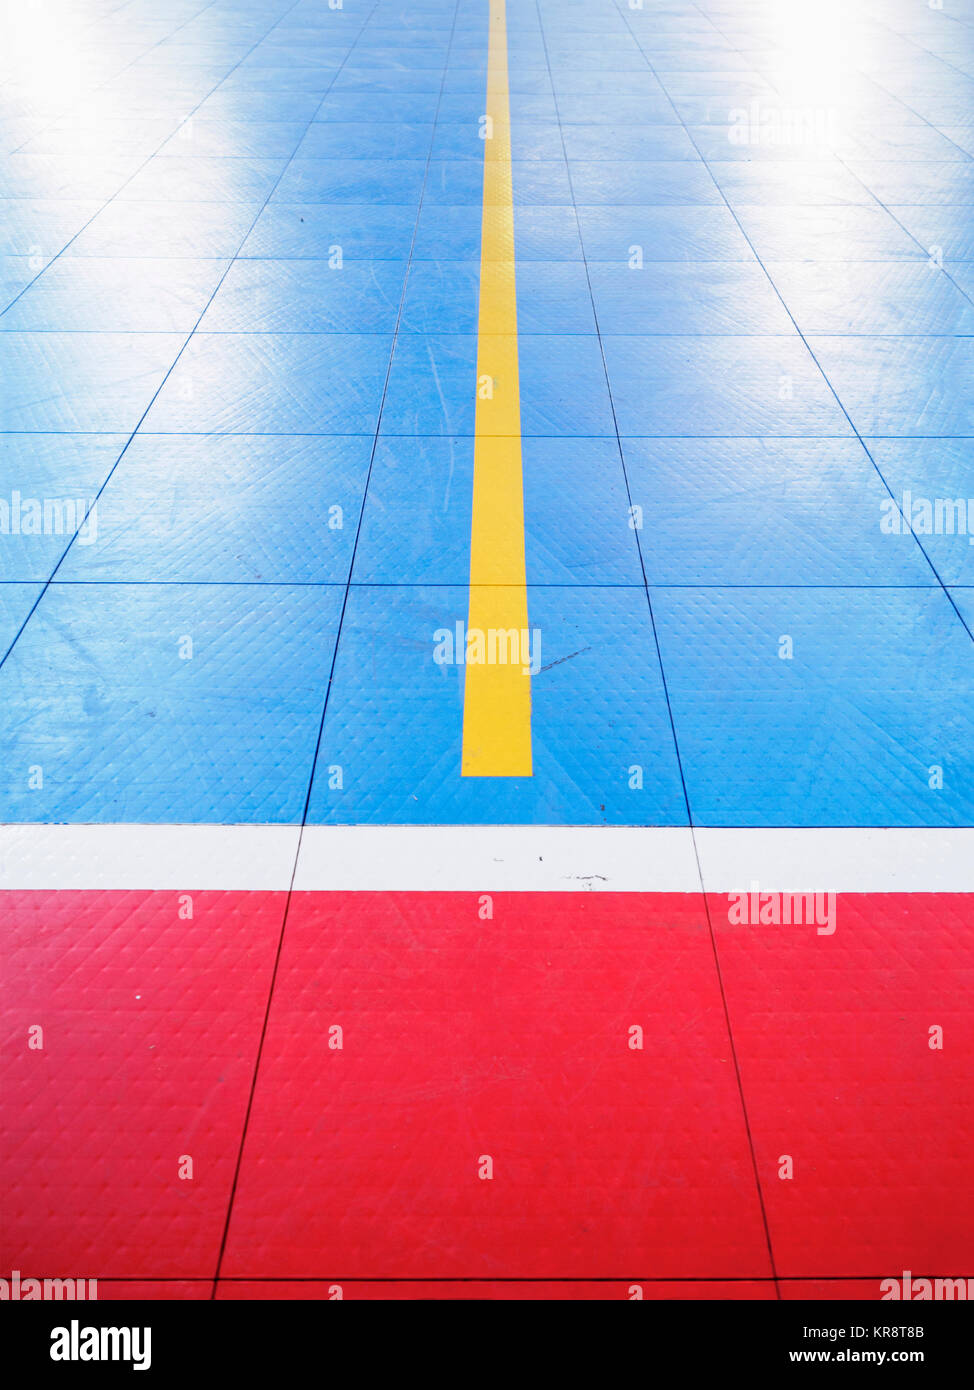 Red and blue tiled floor of basketball court Stock Photo